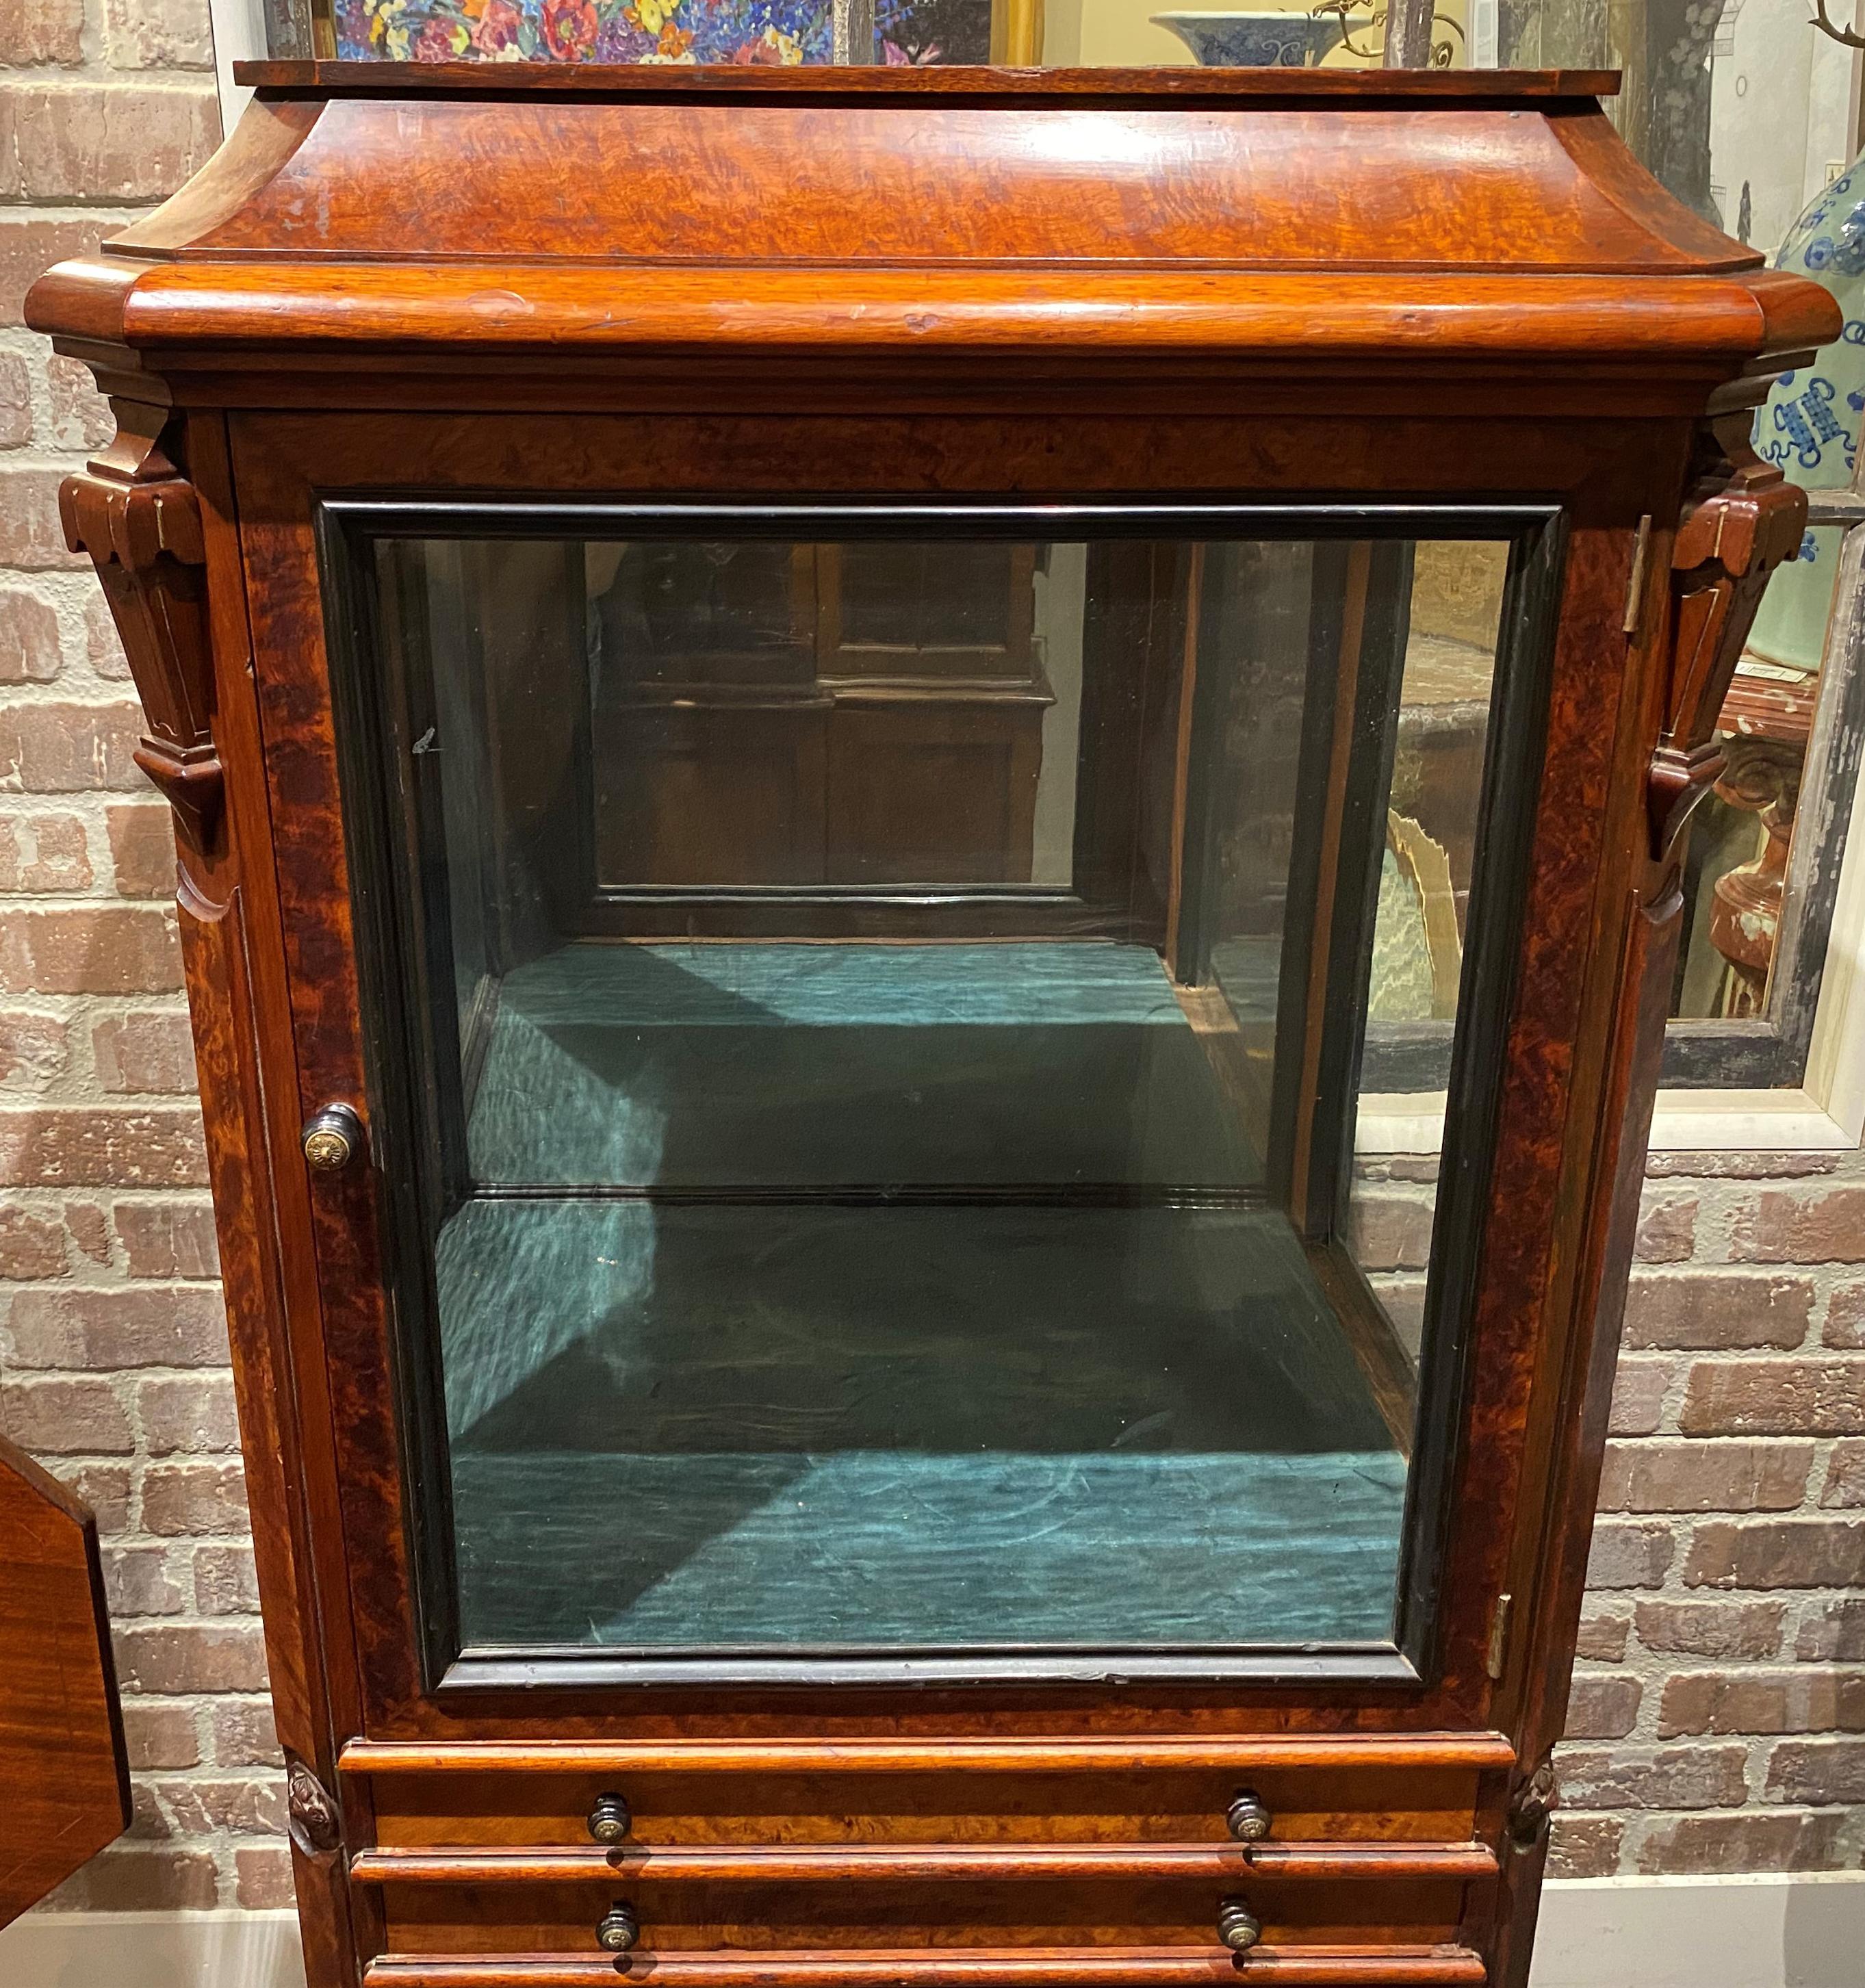 A fine Victorian Eastlake or Aesthetic collectors cabinet in walnut and burled walnut veneer, with molded rectangular top with canted corners surmounting a display compartment with single glass door and two glass sides and mirrored back, and velvet